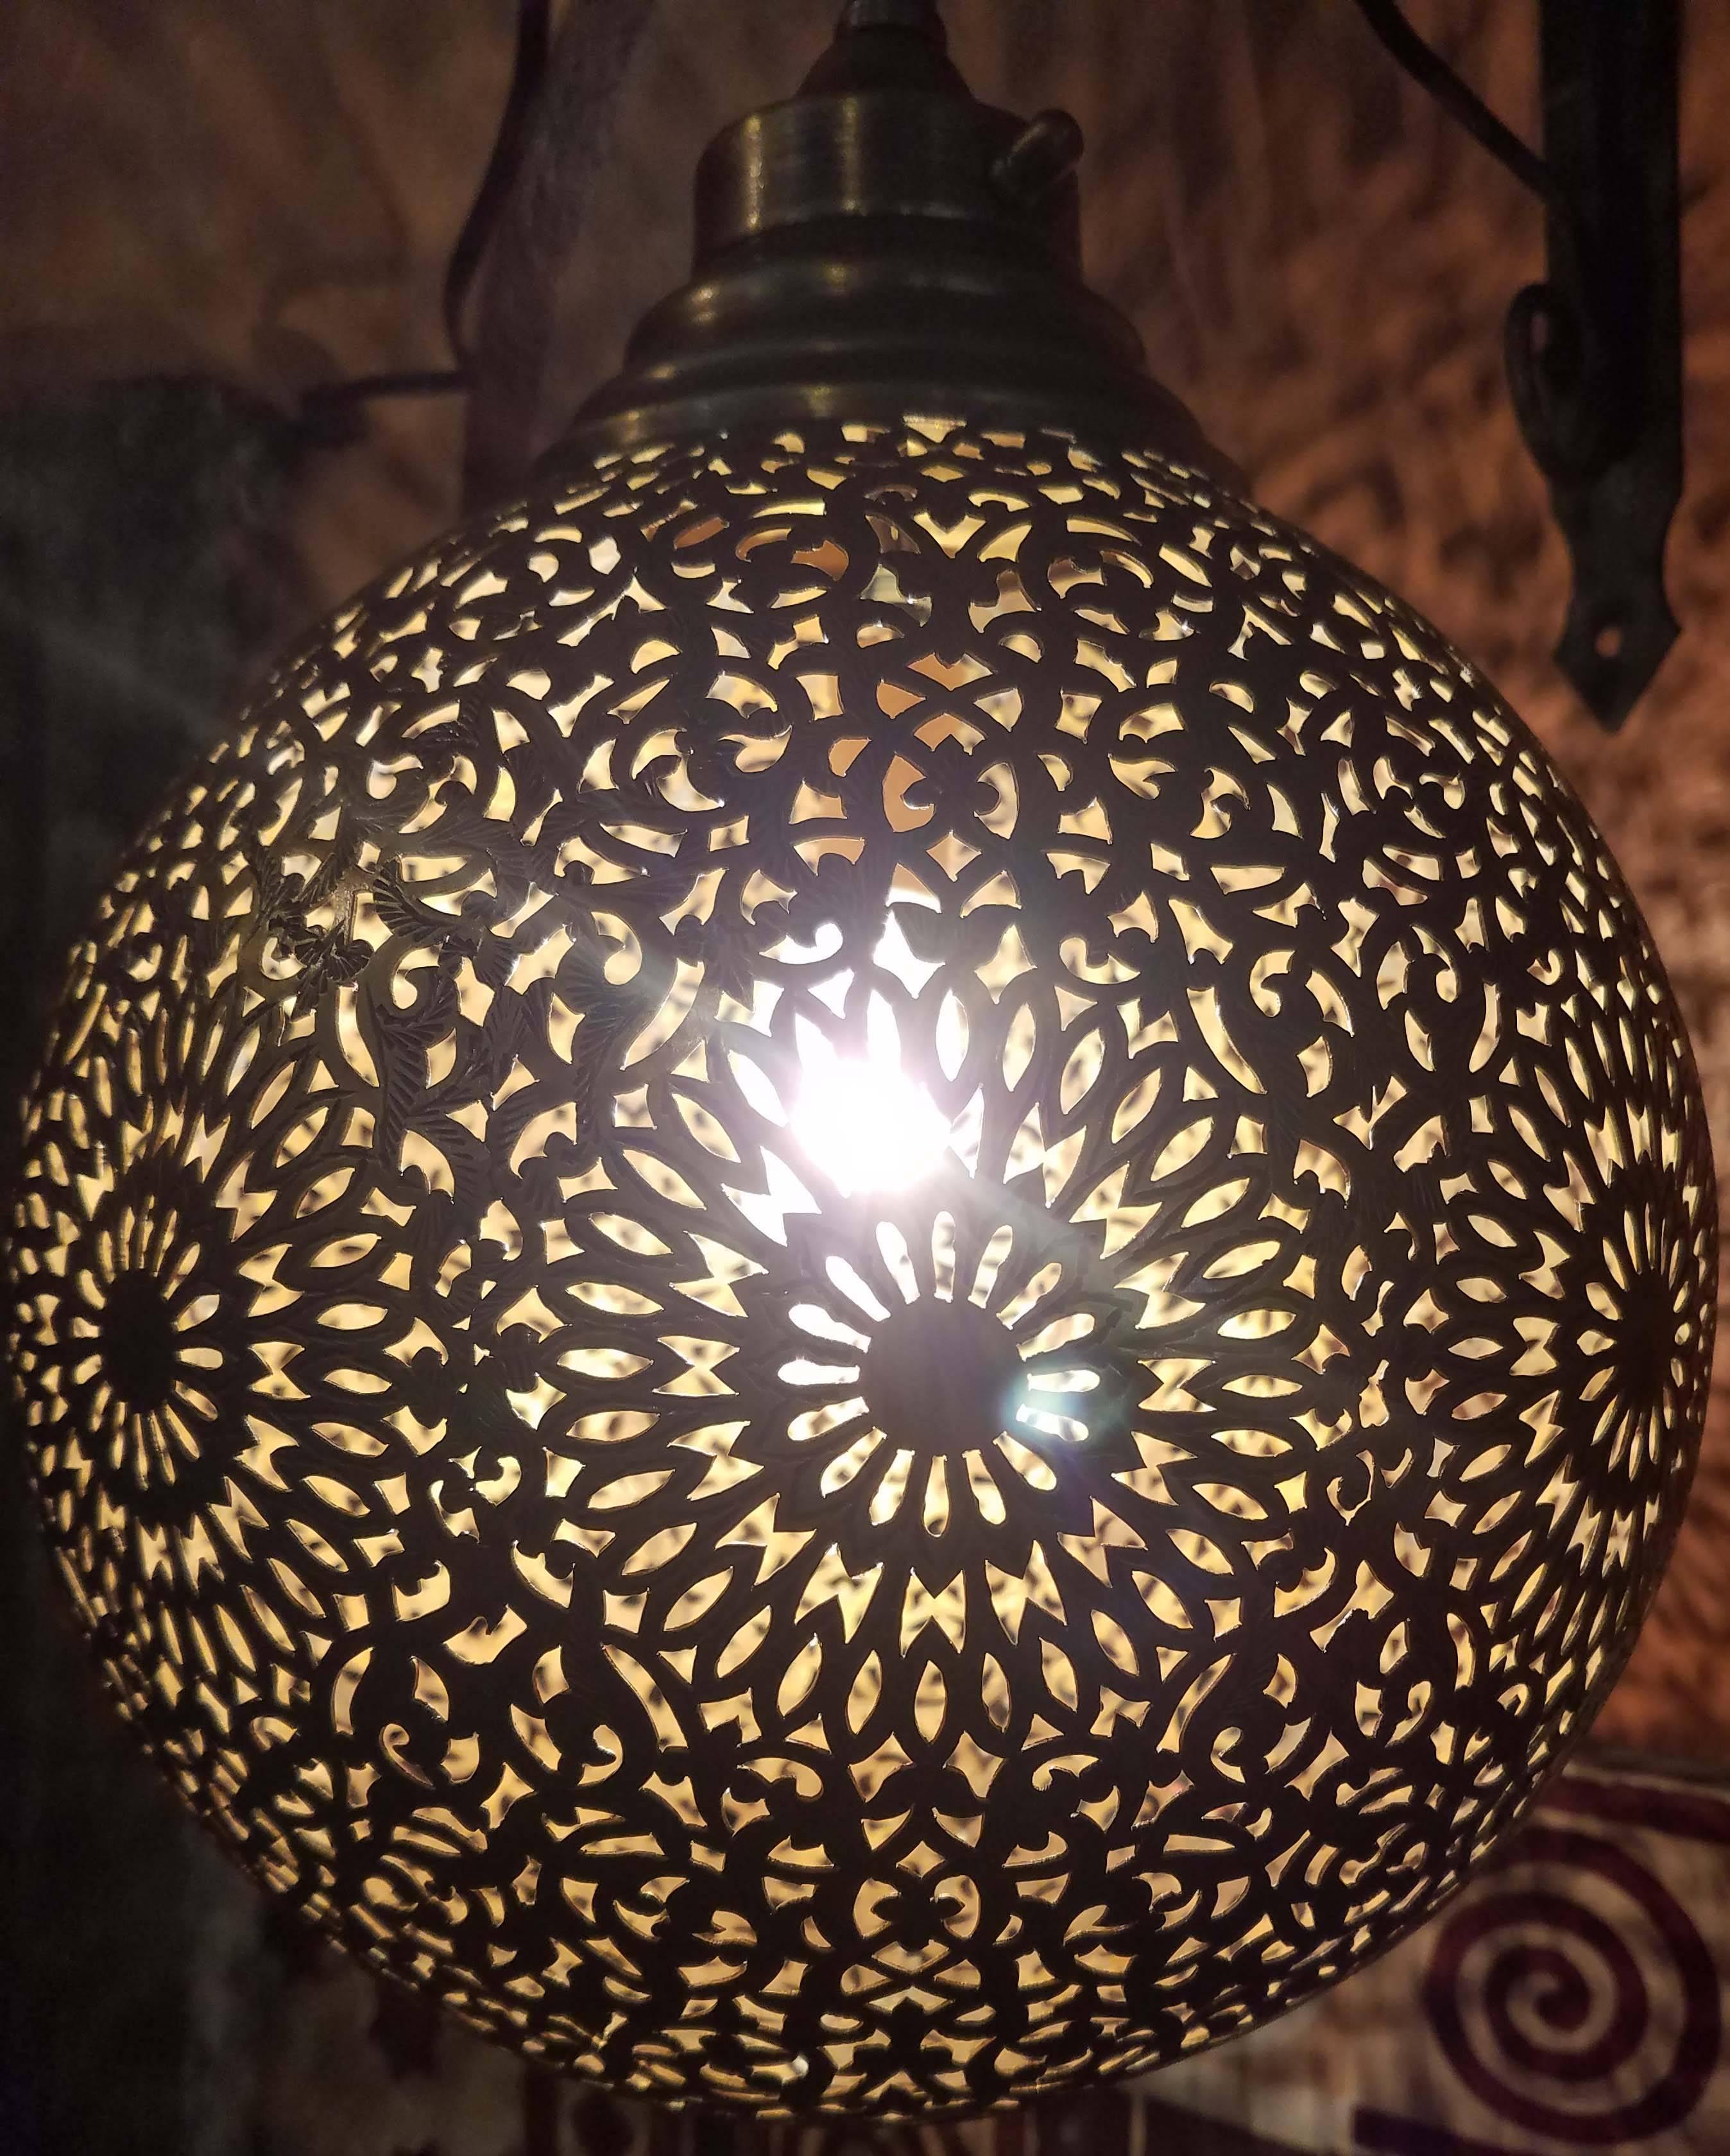 Hammered Intricate Moroccan Copper Wall or Ceiling Lamp or Lantern, Ball Shape